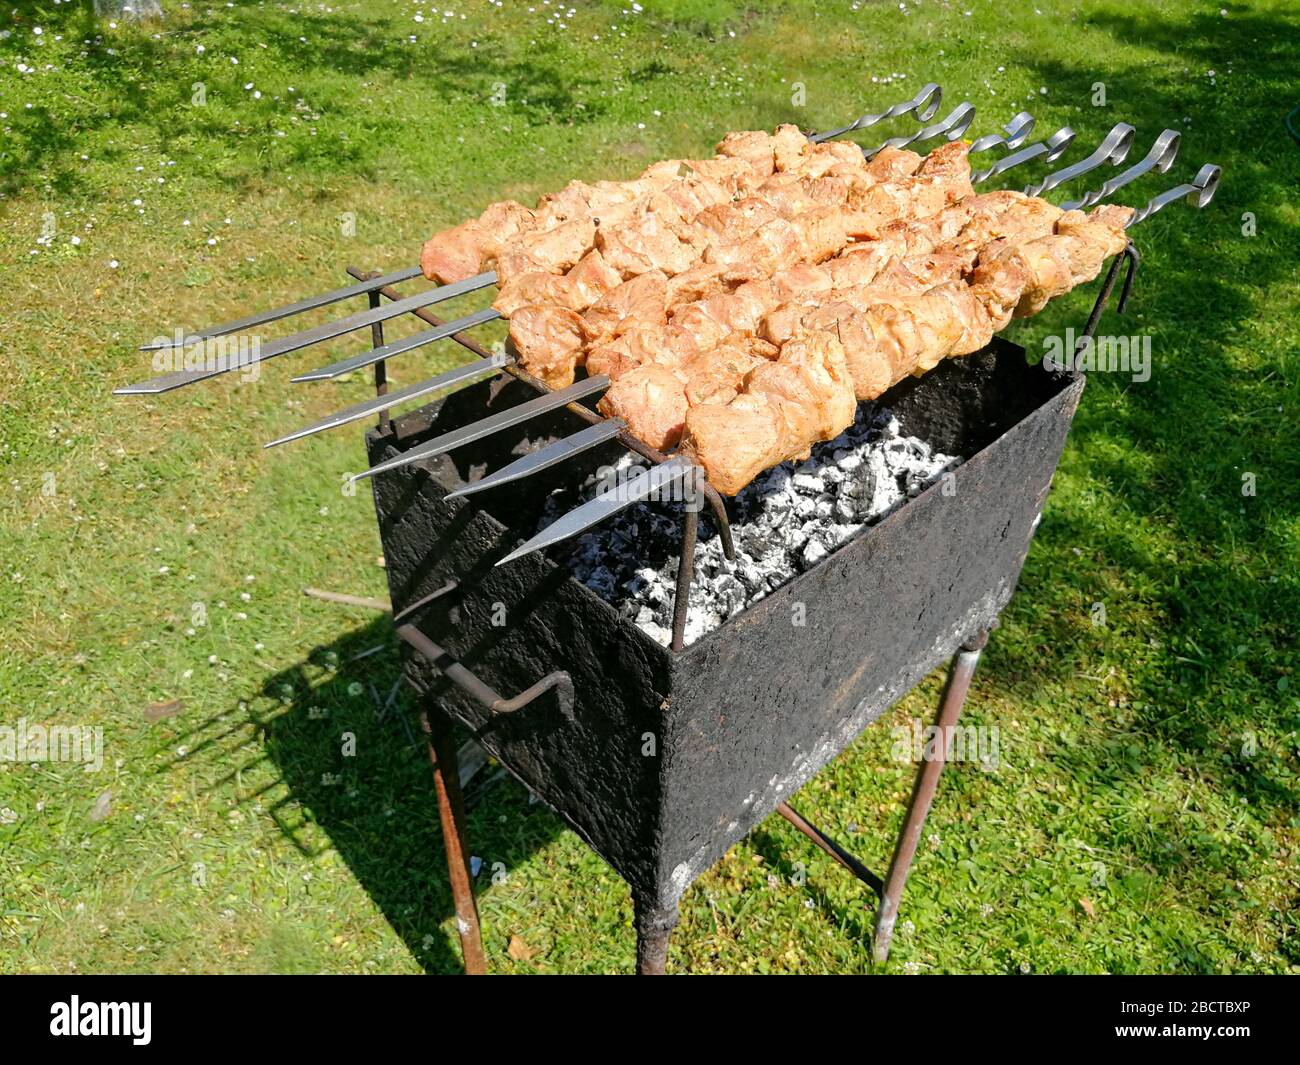 Saslykai or shashlyk grilling on a barbecue grill over charcoal.  Traditional Lithuanian summer dish usual;ly grilled in gardens Stock Photo  - Alamy